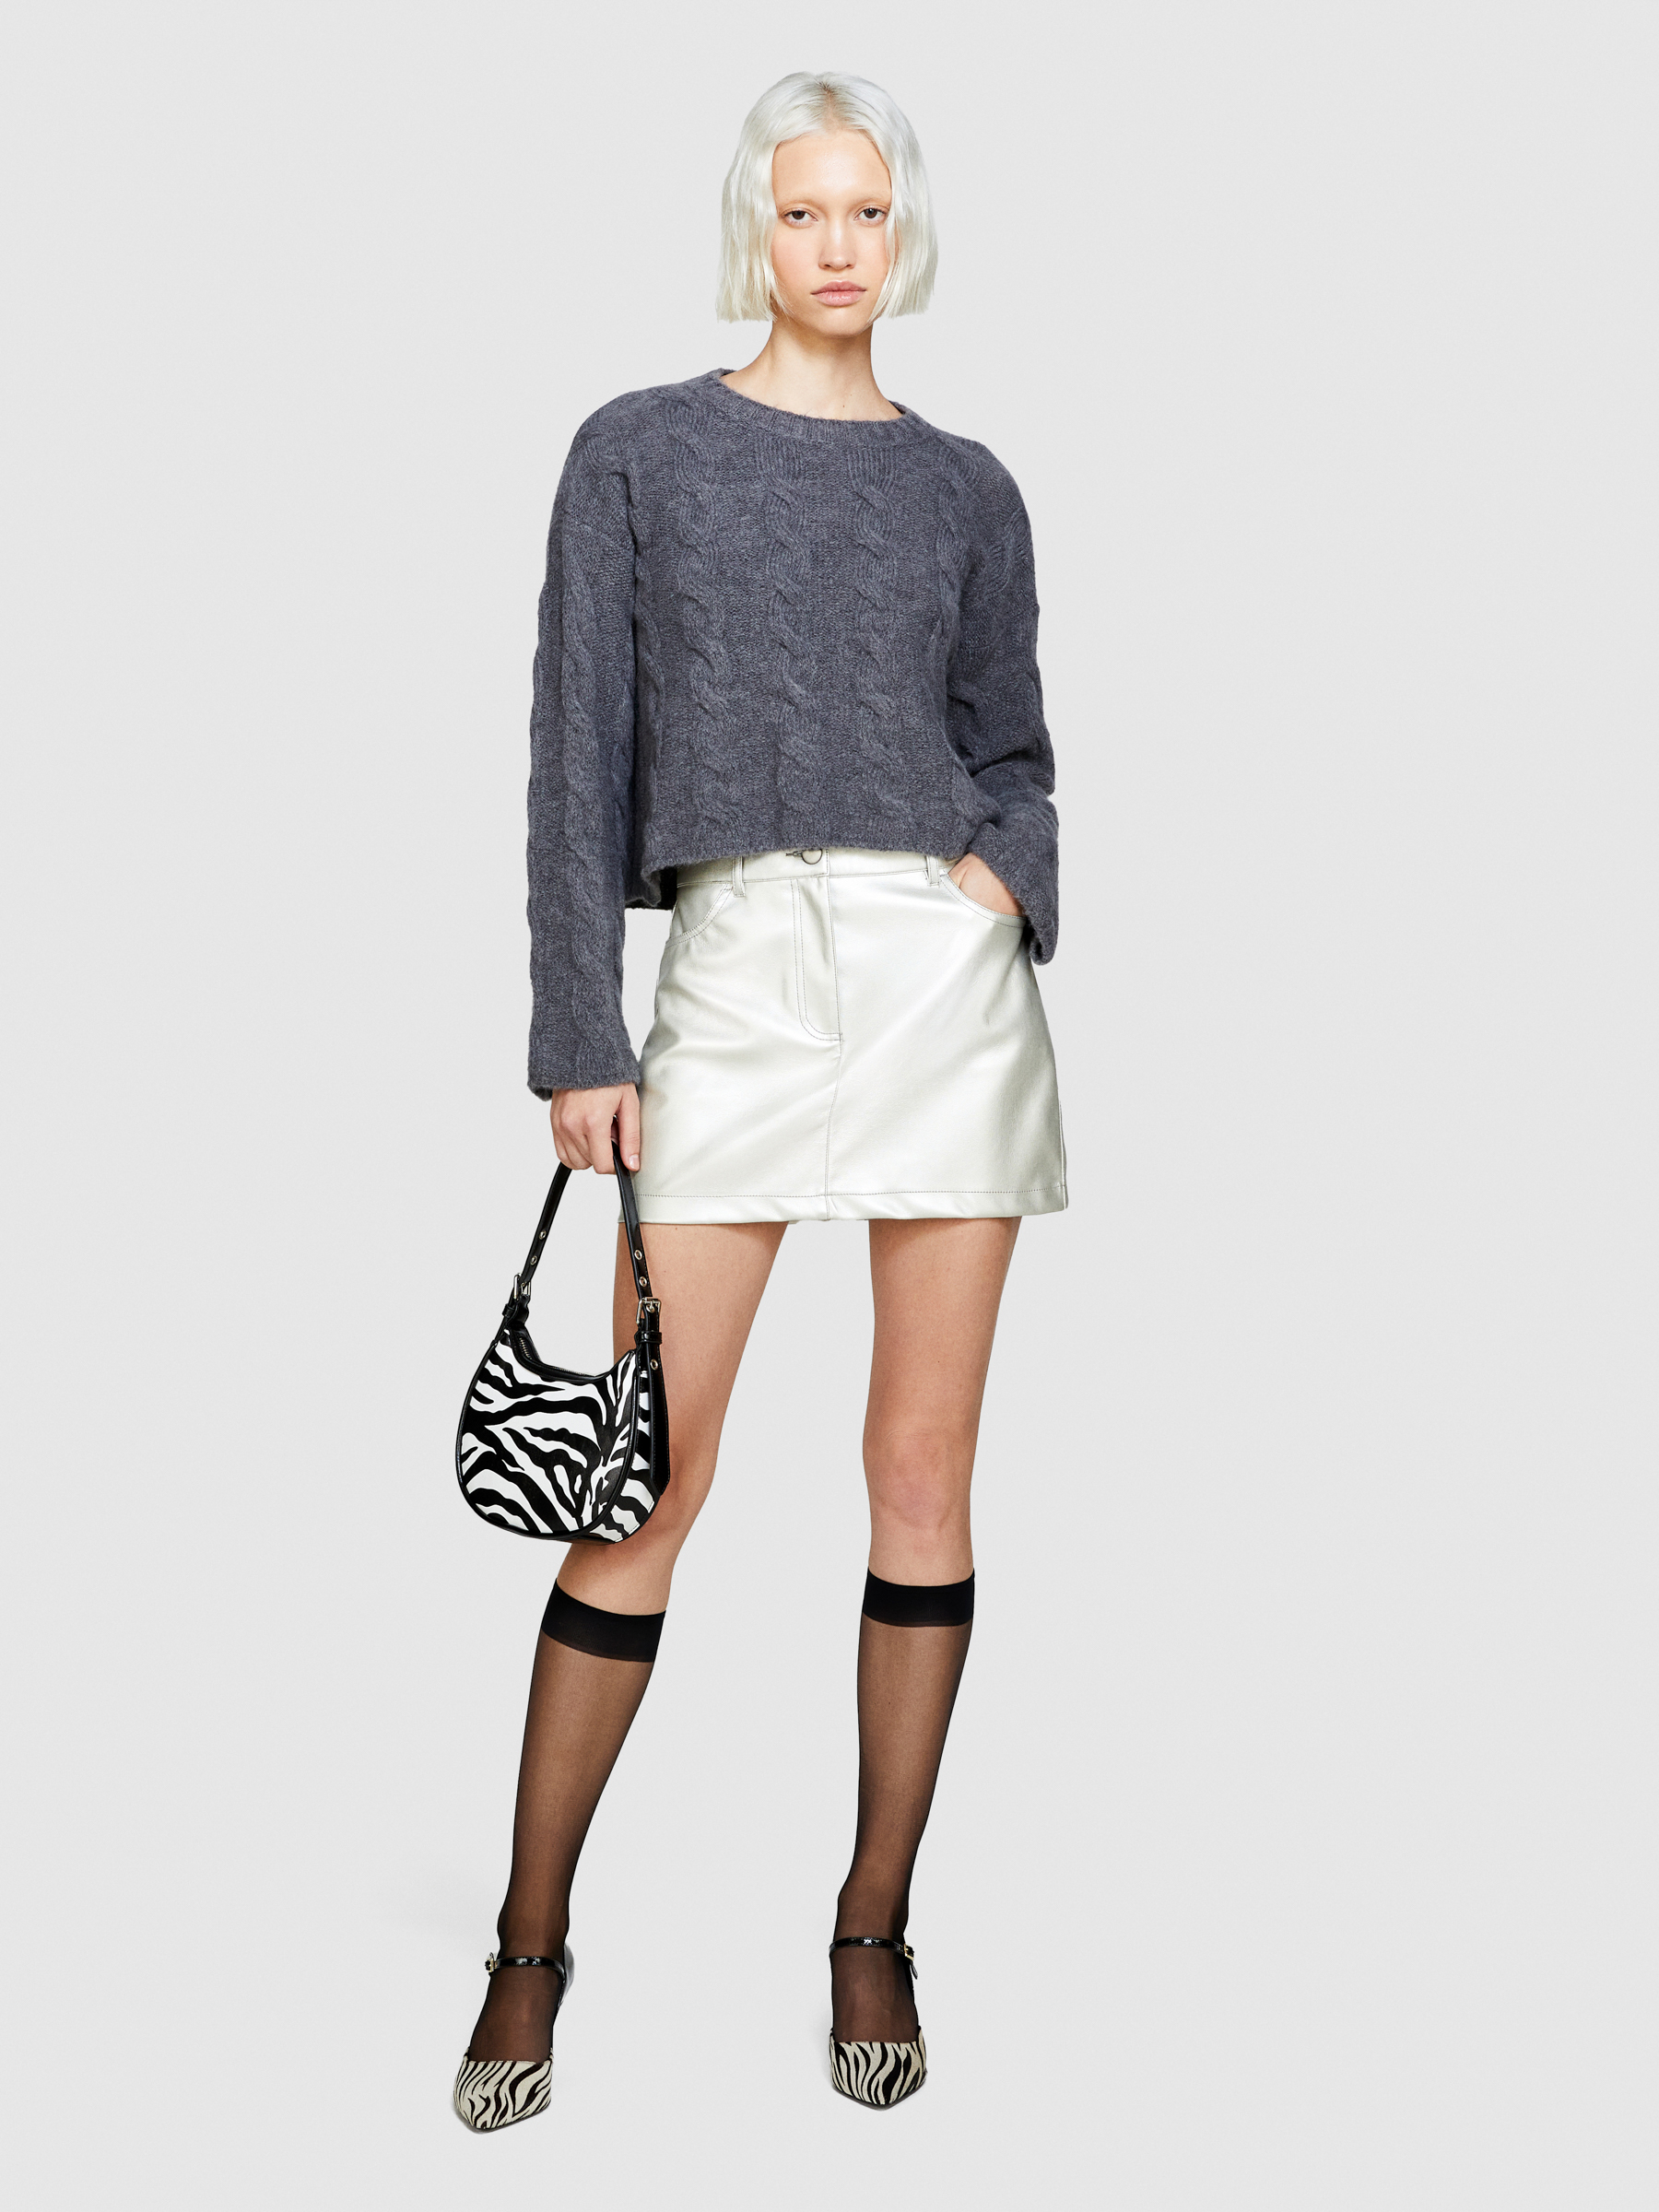 Sisley - Cropped Sweater With Cables, Woman, Dark Gray, Size: S